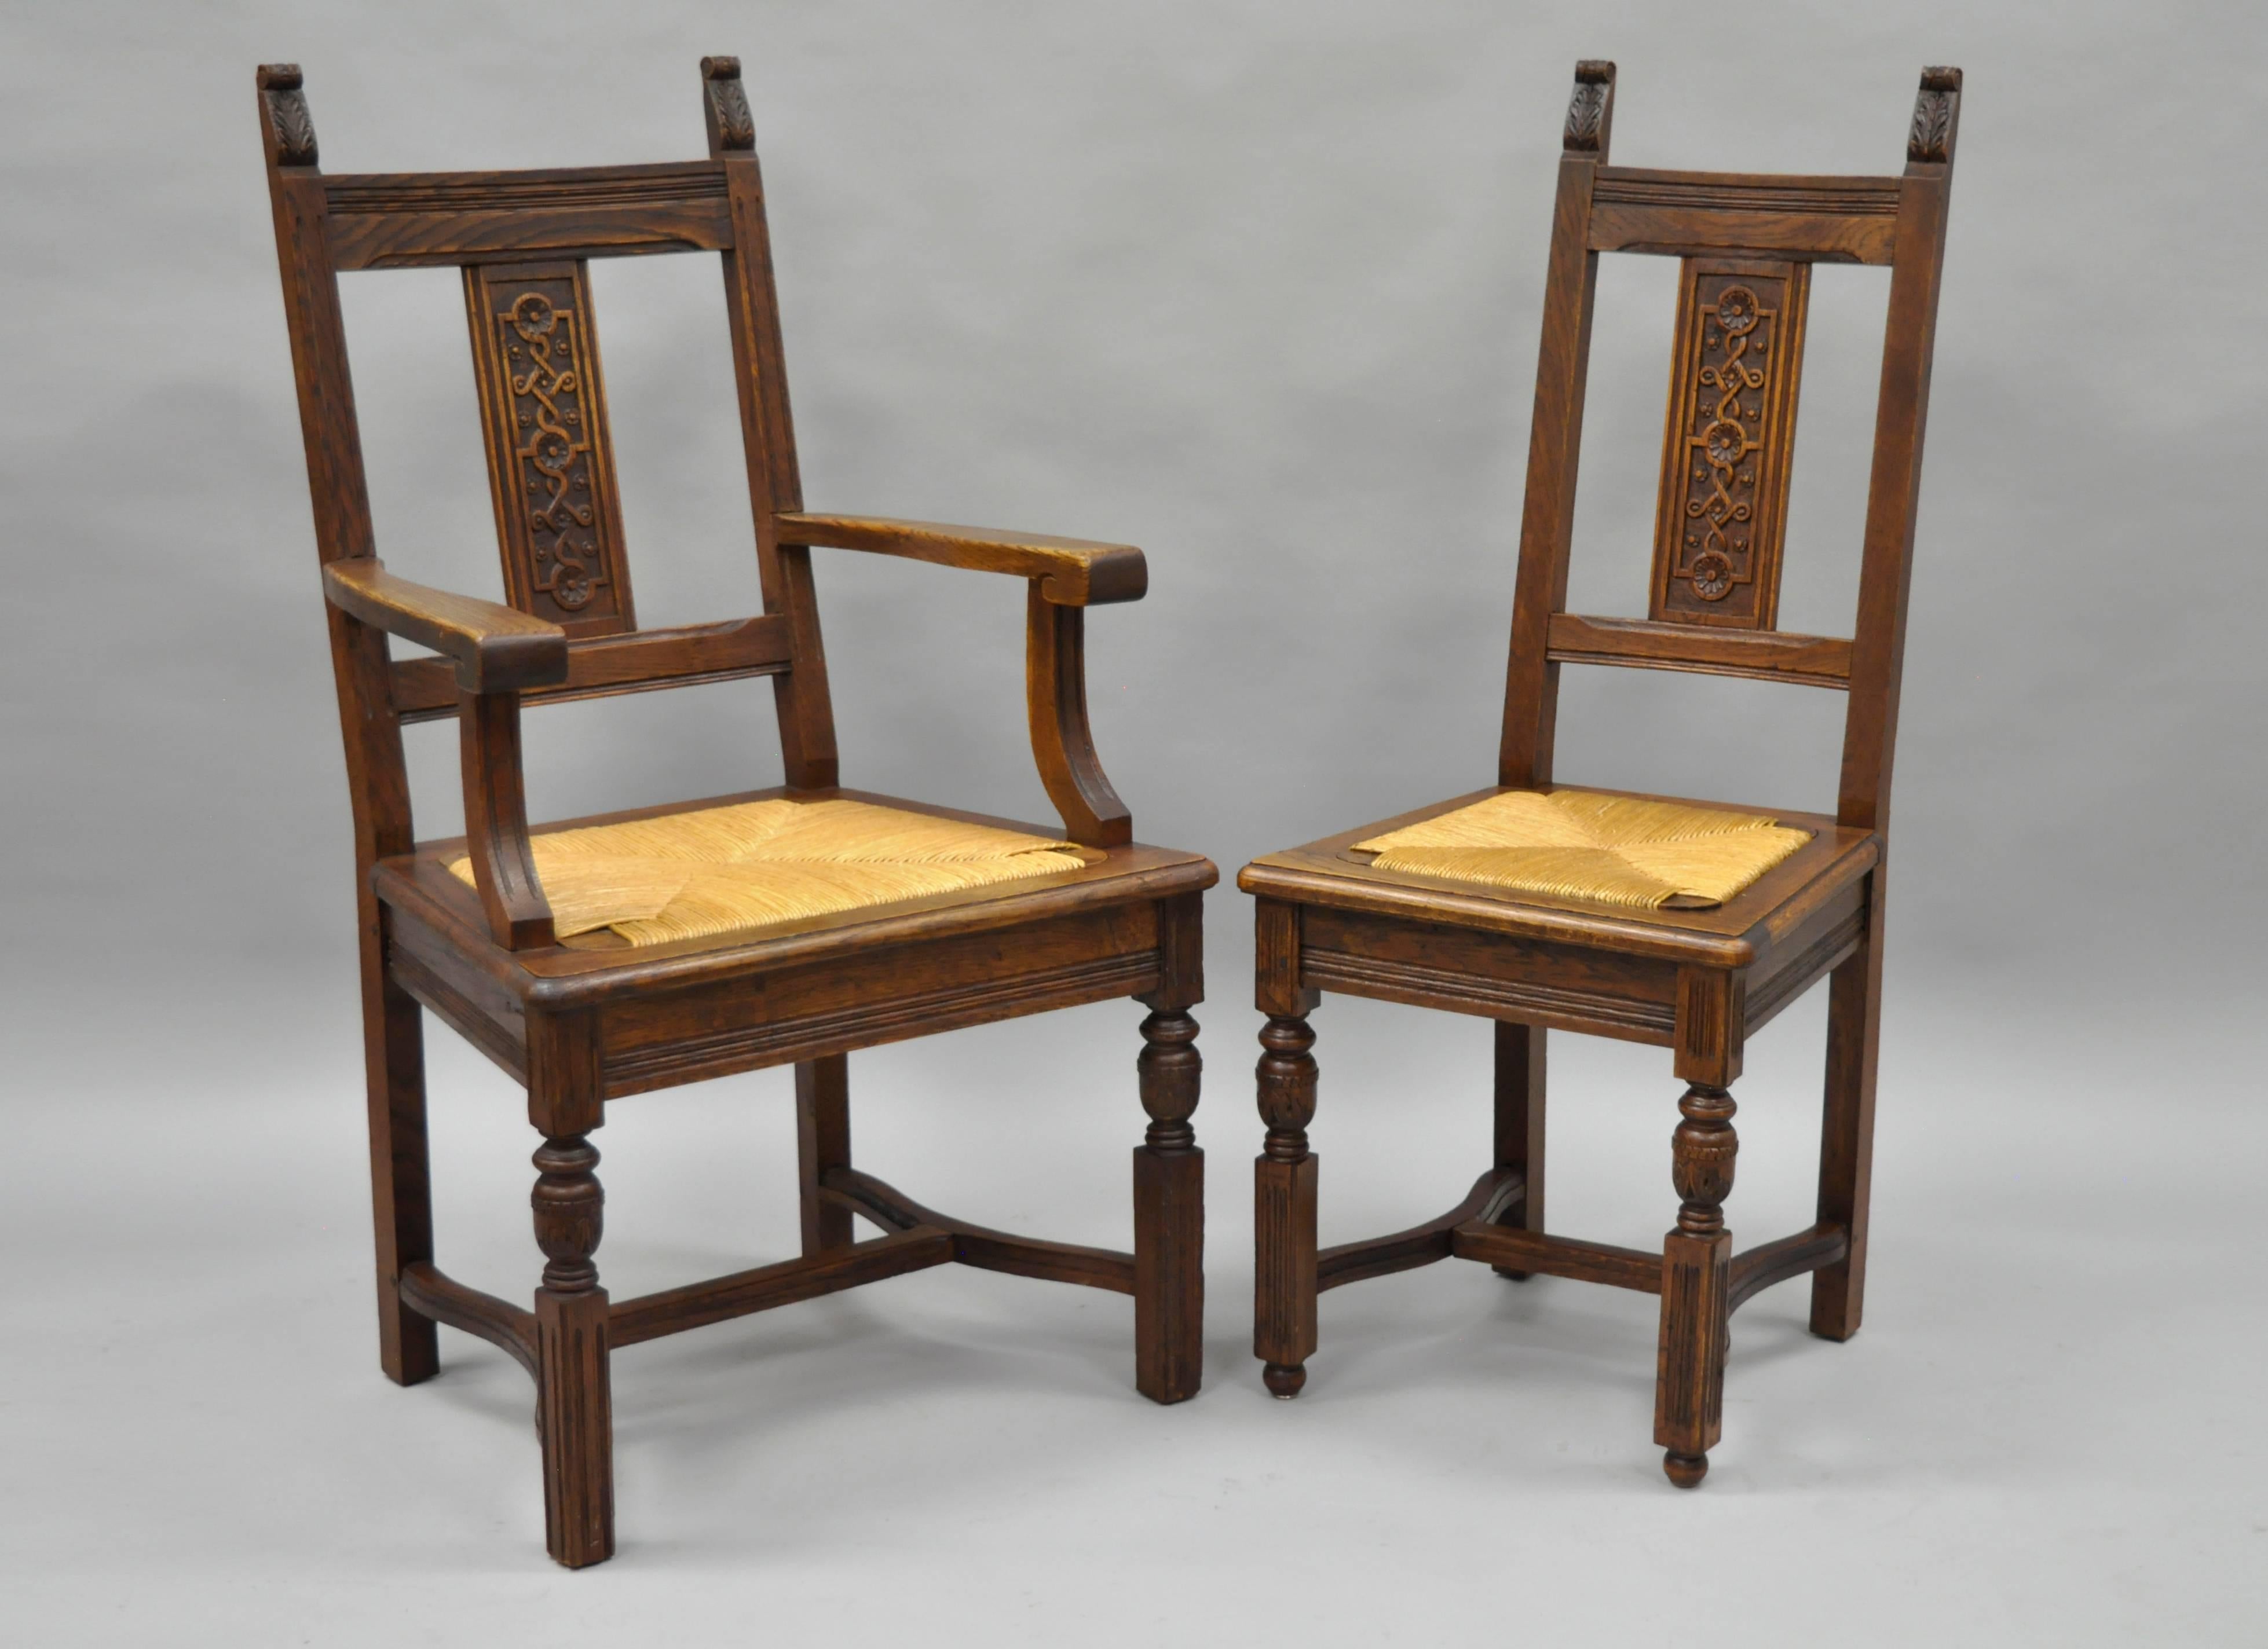 Set of eight antique William & Mary renaissance revival style carved oak dining chairs with woven rush seats. This quality set features six side chairs and two armchairs with solid carved oakwood frames, exposed wooden dowel joinery, spiral carved